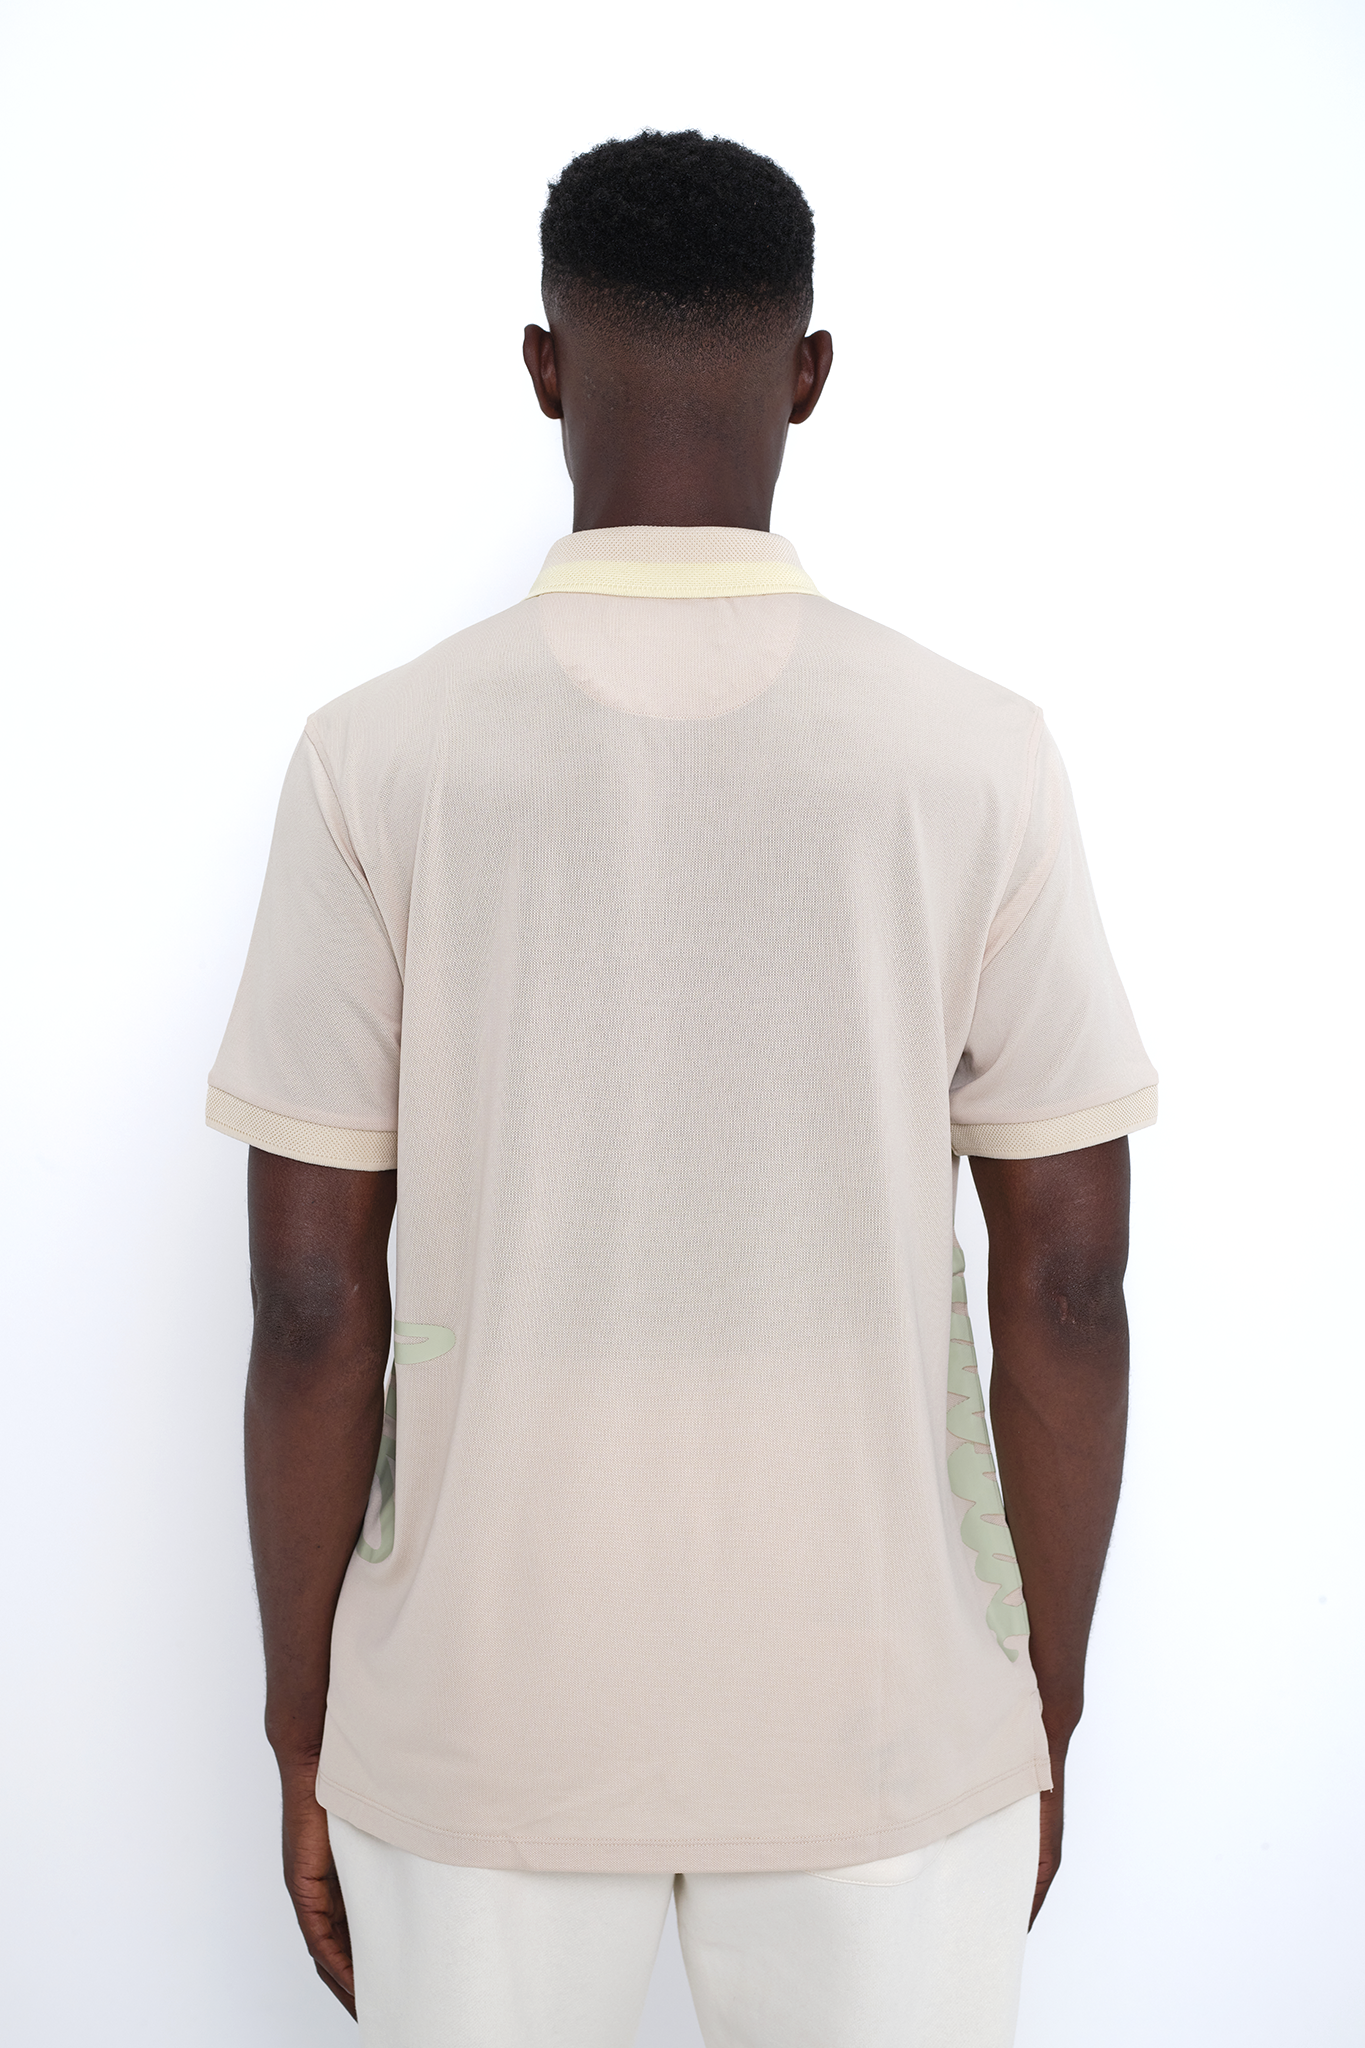 Frosted Almond Eastside Golf Follow Through Polo Shirt